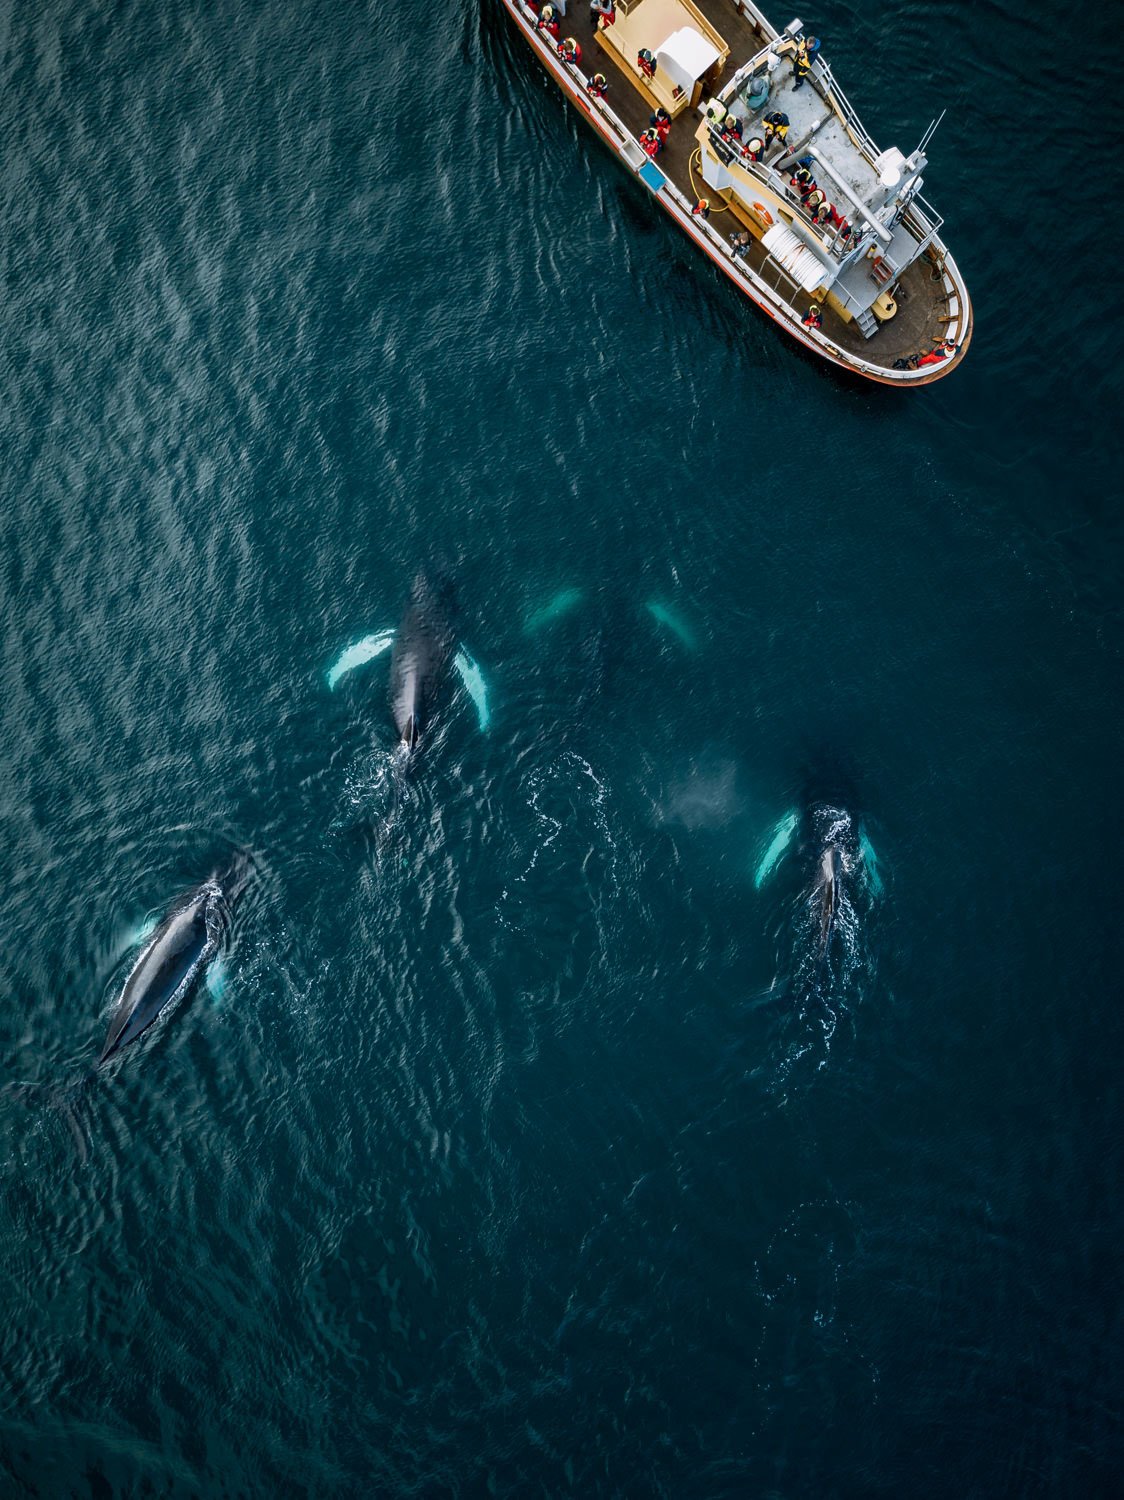 Michael Schauer Shares a Whale Watching Story with Aerial Photos